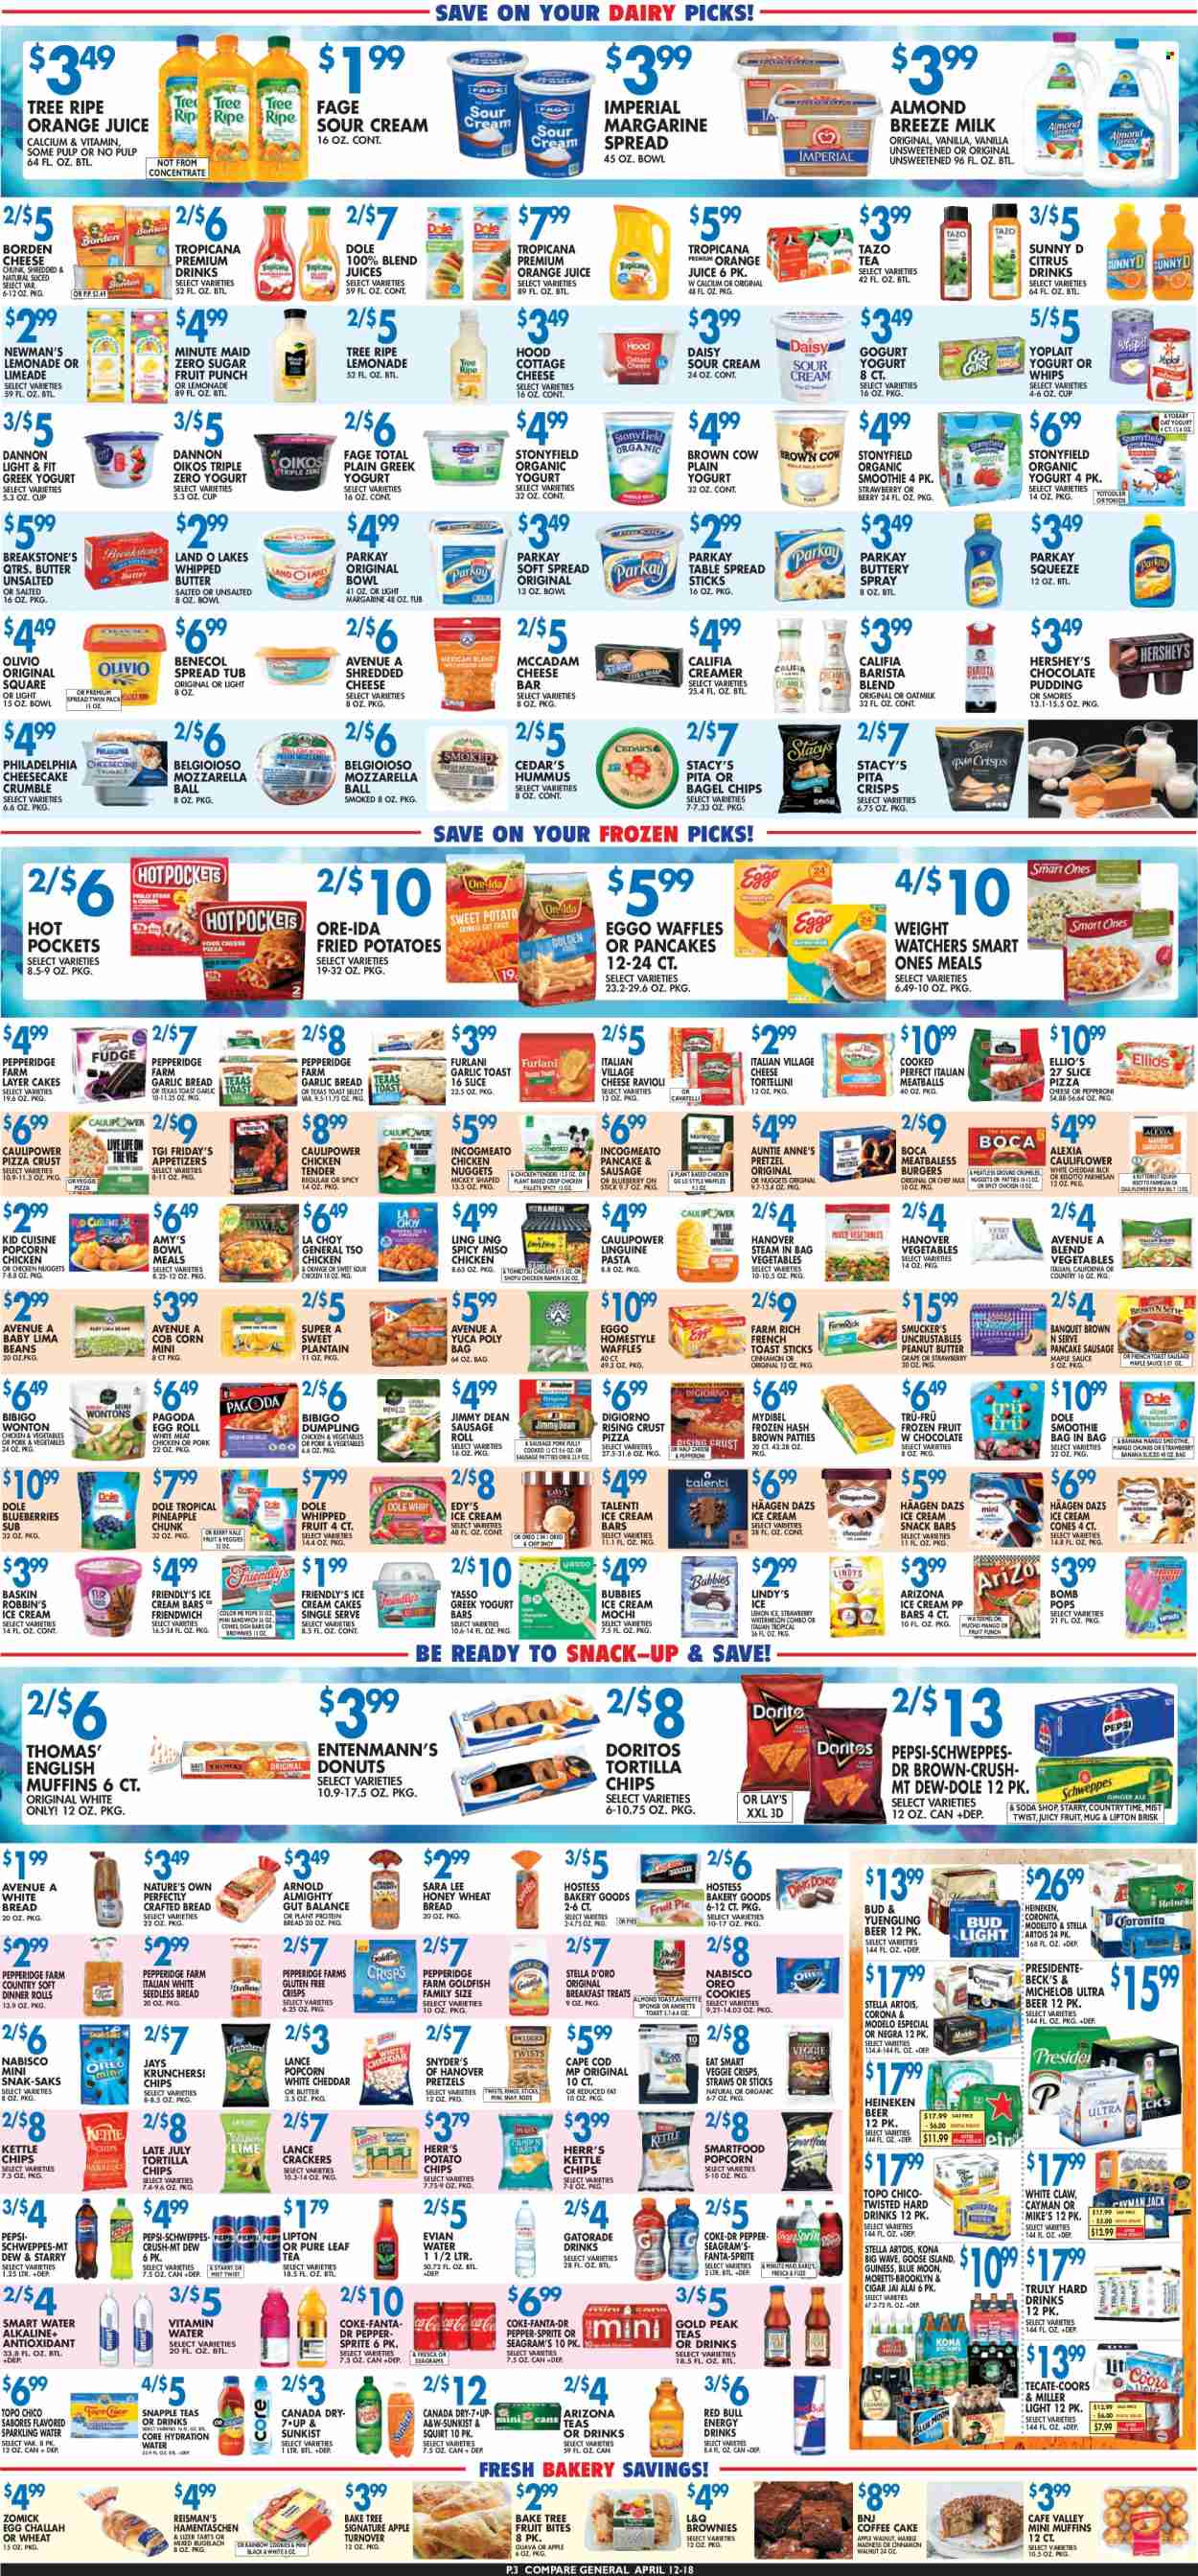 Compare Foods ad  - 04.12.2024 - 04.18.2024.